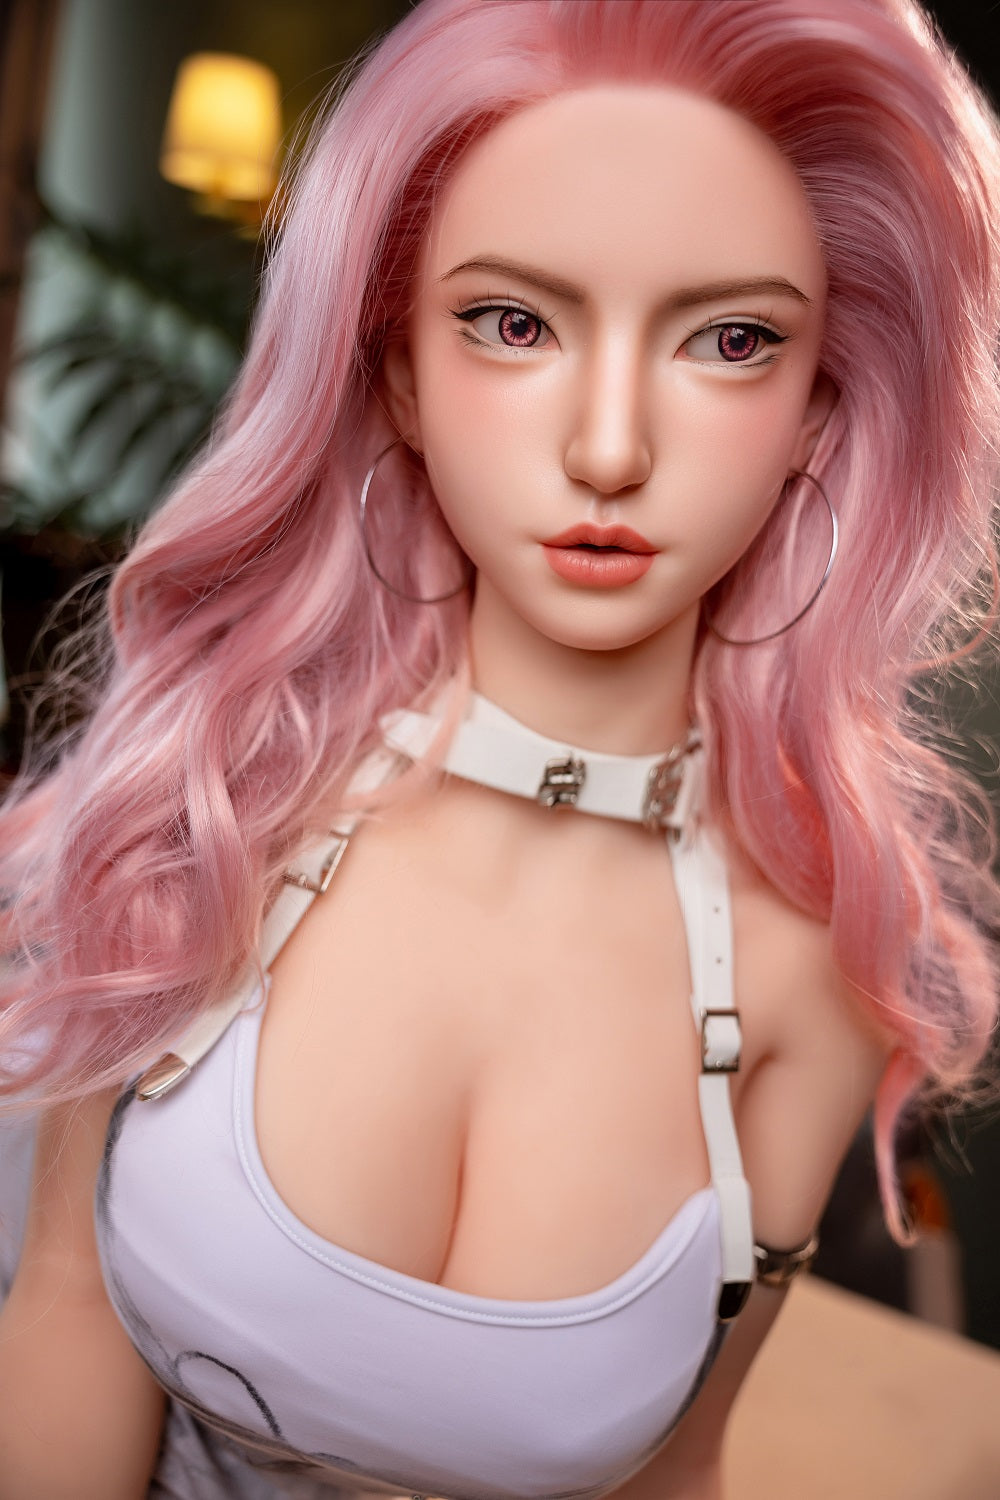 US Stock - YAMIEE Rylee  5ft35 / 163cm Unique Design Silicone Head Sex Doll TPE Body Best Realistic Sex Doll For Belowjob